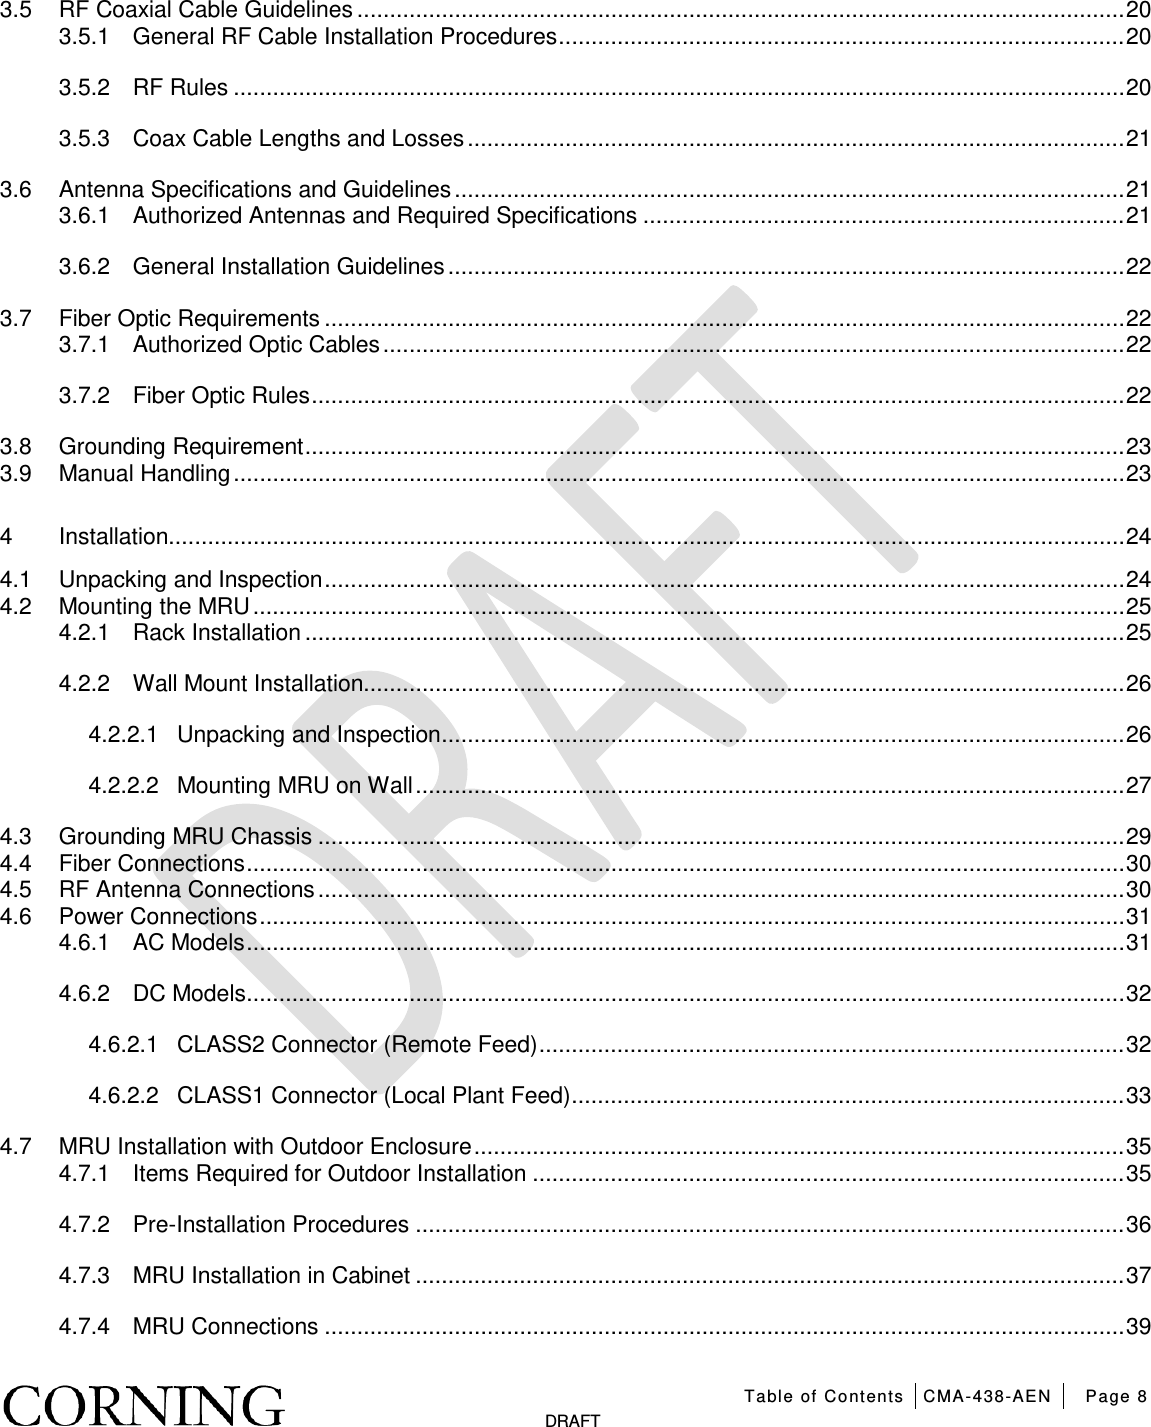   Table of Contents CMA-438-AEN Page 8   DRAFT 3.5 RF Coaxial Cable Guidelines ...................................................................................................................... 20 3.5.1 General RF Cable Installation Procedures ....................................................................................... 20 3.5.2 RF Rules ......................................................................................................................................... 20 3.5.3 Coax Cable Lengths and Losses ..................................................................................................... 21 3.6 Antenna Specifications and Guidelines ....................................................................................................... 21 3.6.1 Authorized Antennas and Required Specifications .......................................................................... 21 3.6.2 General Installation Guidelines ........................................................................................................ 22 3.7 Fiber Optic Requirements ........................................................................................................................... 22 3.7.1 Authorized Optic Cables .................................................................................................................. 22 3.7.2 Fiber Optic Rules ............................................................................................................................. 22 3.8 Grounding Requirement .............................................................................................................................. 23 3.9 Manual Handling ......................................................................................................................................... 23 4 Installation................................................................................................................................................... 24 4.1 Unpacking and Inspection ........................................................................................................................... 24 4.2 Mounting the MRU ...................................................................................................................................... 25 4.2.1 Rack Installation .............................................................................................................................. 25 4.2.2 Wall Mount Installation..................................................................................................................... 26 4.2.2.1 Unpacking and Inspection ......................................................................................................... 26 4.2.2.2 Mounting MRU on Wall ............................................................................................................. 27 4.3 Grounding MRU Chassis ............................................................................................................................ 29 4.4 Fiber Connections ....................................................................................................................................... 30 4.5 RF Antenna Connections ............................................................................................................................ 30 4.6 Power Connections ..................................................................................................................................... 31 4.6.1 AC Models ....................................................................................................................................... 31 4.6.2 DC Models ....................................................................................................................................... 32 4.6.2.1 CLASS2 Connector (Remote Feed) .......................................................................................... 32 4.6.2.2 CLASS1 Connector (Local Plant Feed) ..................................................................................... 33 4.7 MRU Installation with Outdoor Enclosure .................................................................................................... 35 4.7.1 Items Required for Outdoor Installation ........................................................................................... 35 4.7.2 Pre-Installation Procedures ............................................................................................................. 36 4.7.3 MRU Installation in Cabinet ............................................................................................................. 37 4.7.4 MRU Connections ........................................................................................................................... 39 